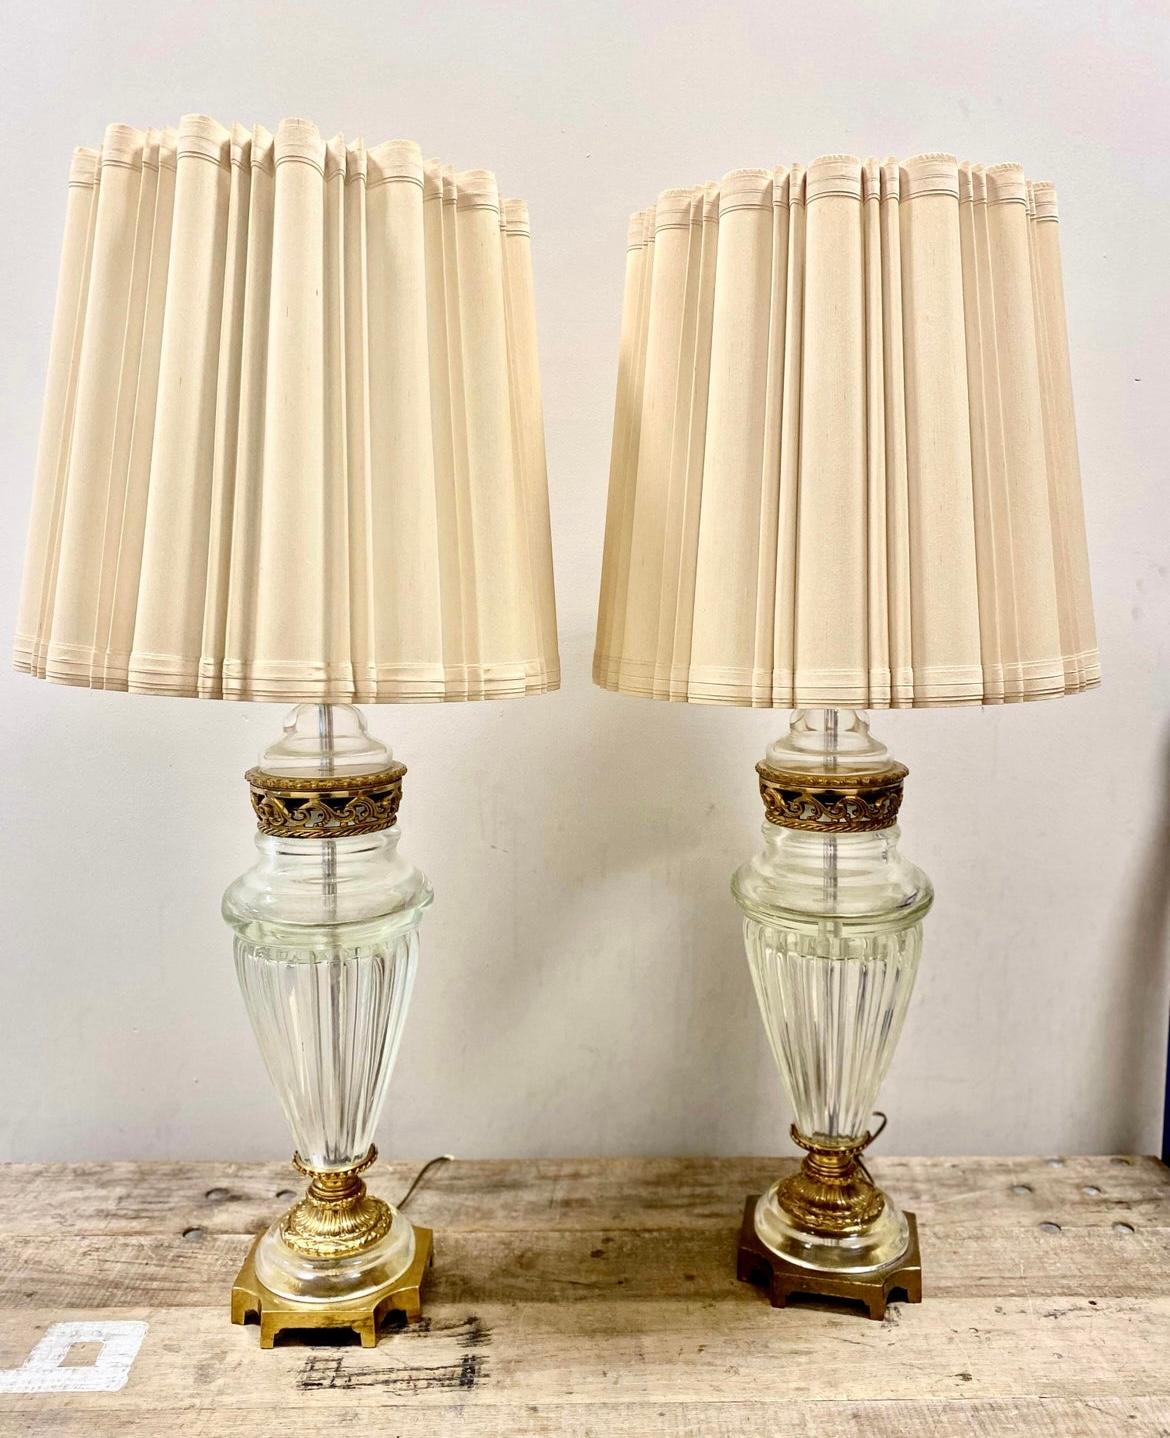 Mesmerizing Murano crystal lamp with deep vertical ribs and ornate brass adornments. The thick high quality cystal has a deep rich glow when lit.
Each surmounted by the original cylindrical pleated shade, the body of baluster form is 20’ with brass